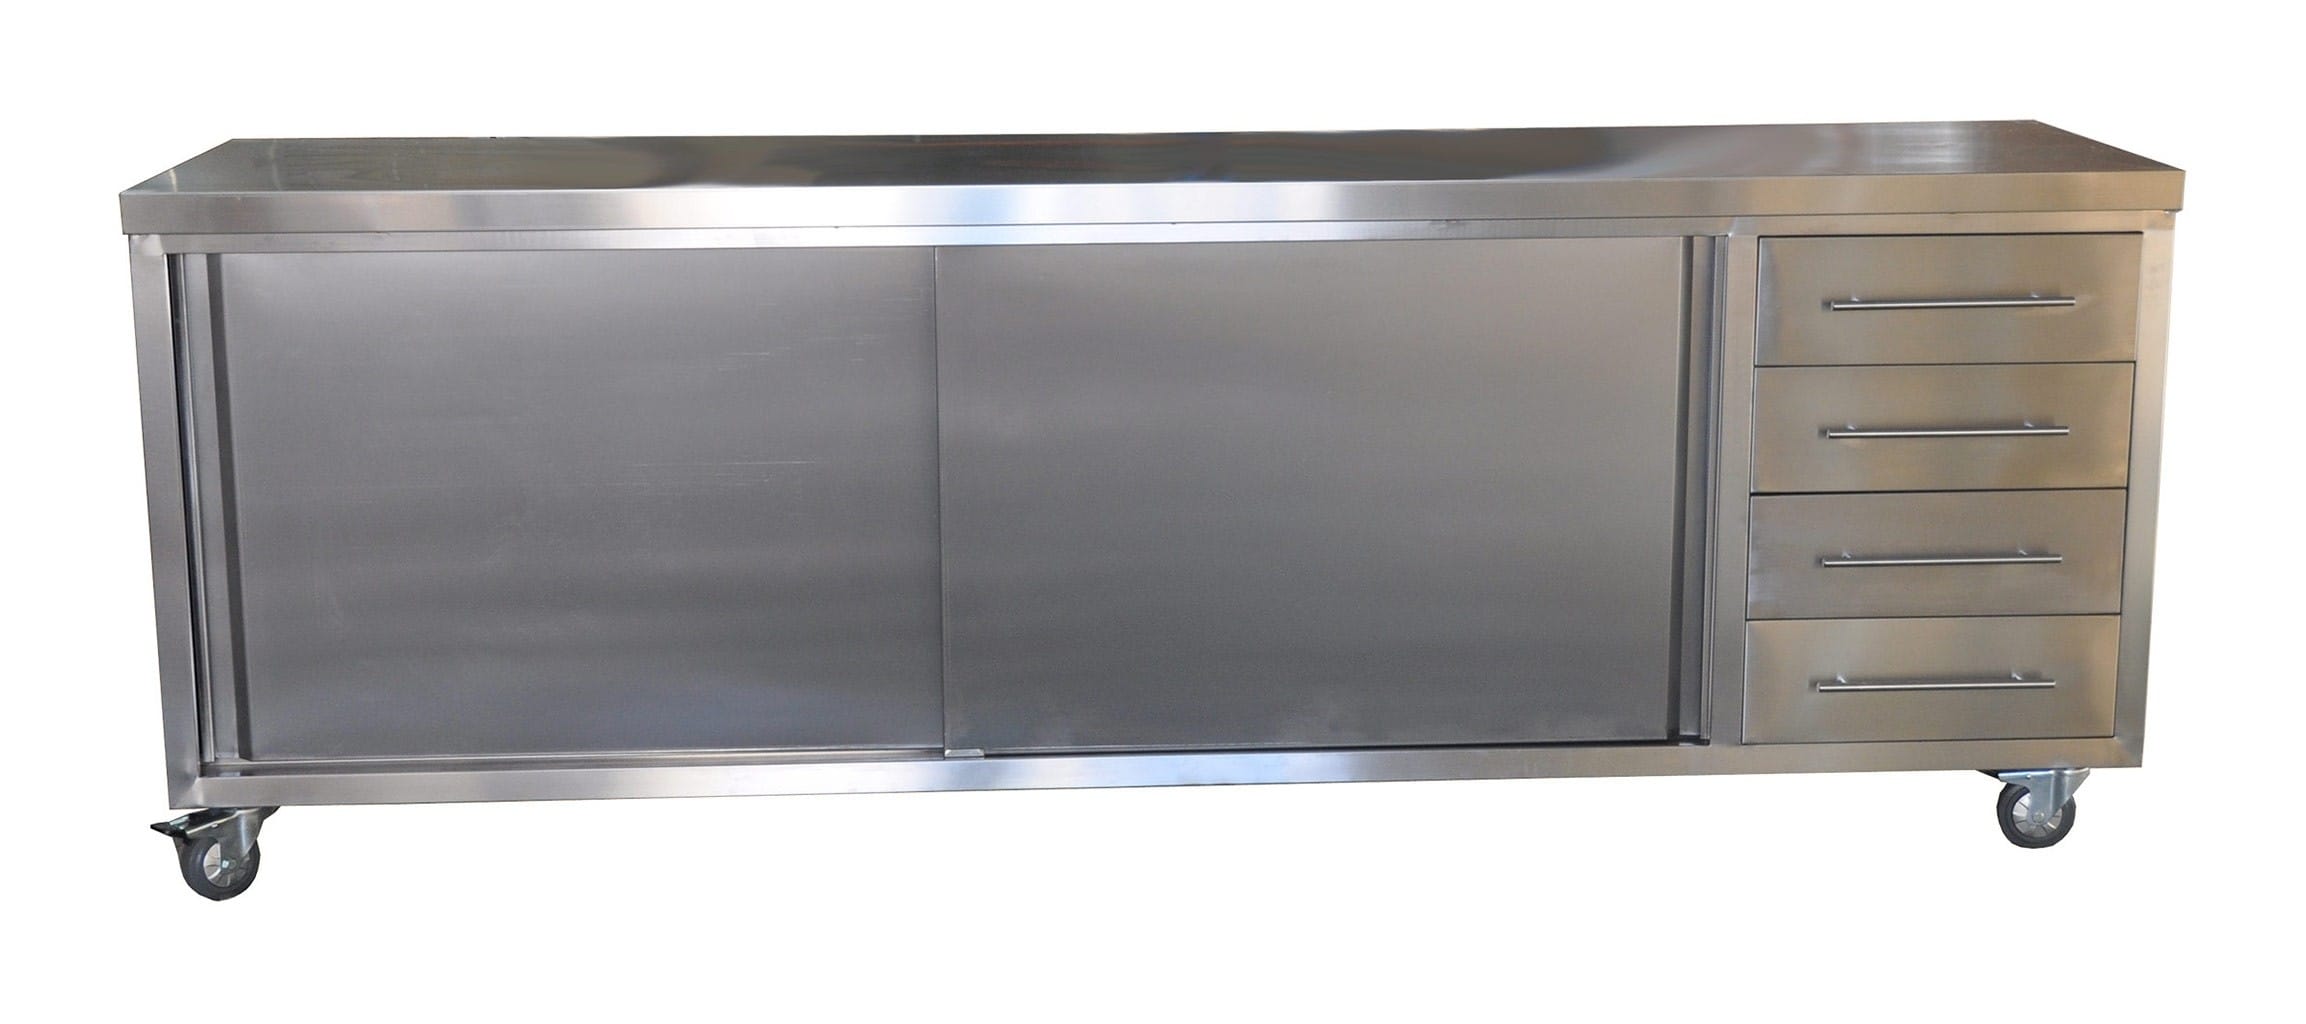 Stainless Commercial Kitchen Cabinet, 2490 x 610 x 900mm high.